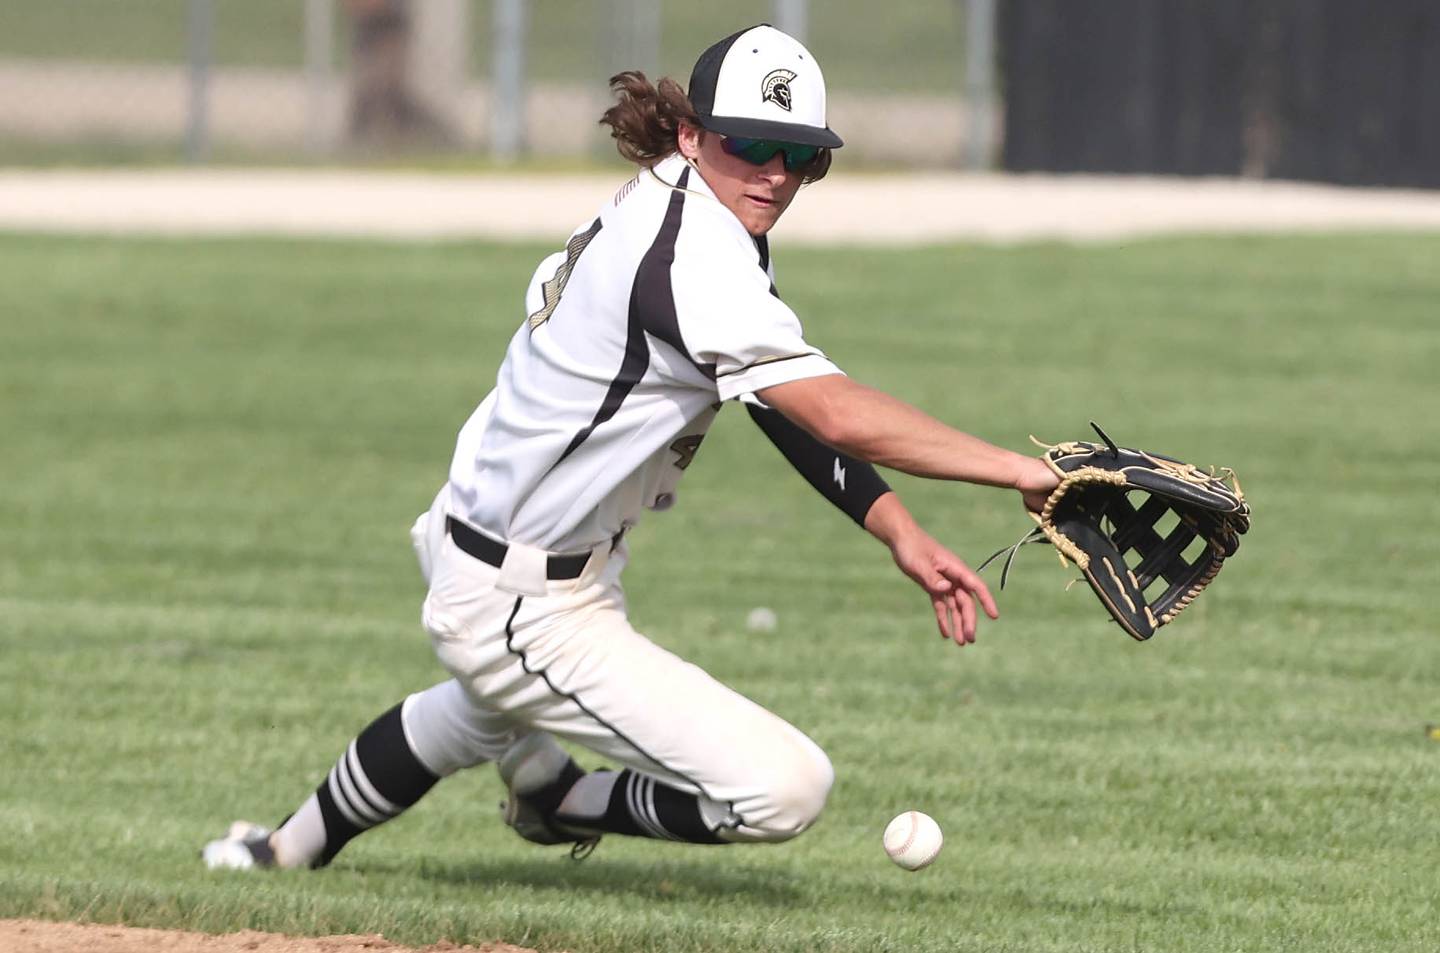 Sycamore's Collin Severson tries to make a play during their game against Morris Tuesday, May 9, 2023, at the Sycamore Community Sports Complex.